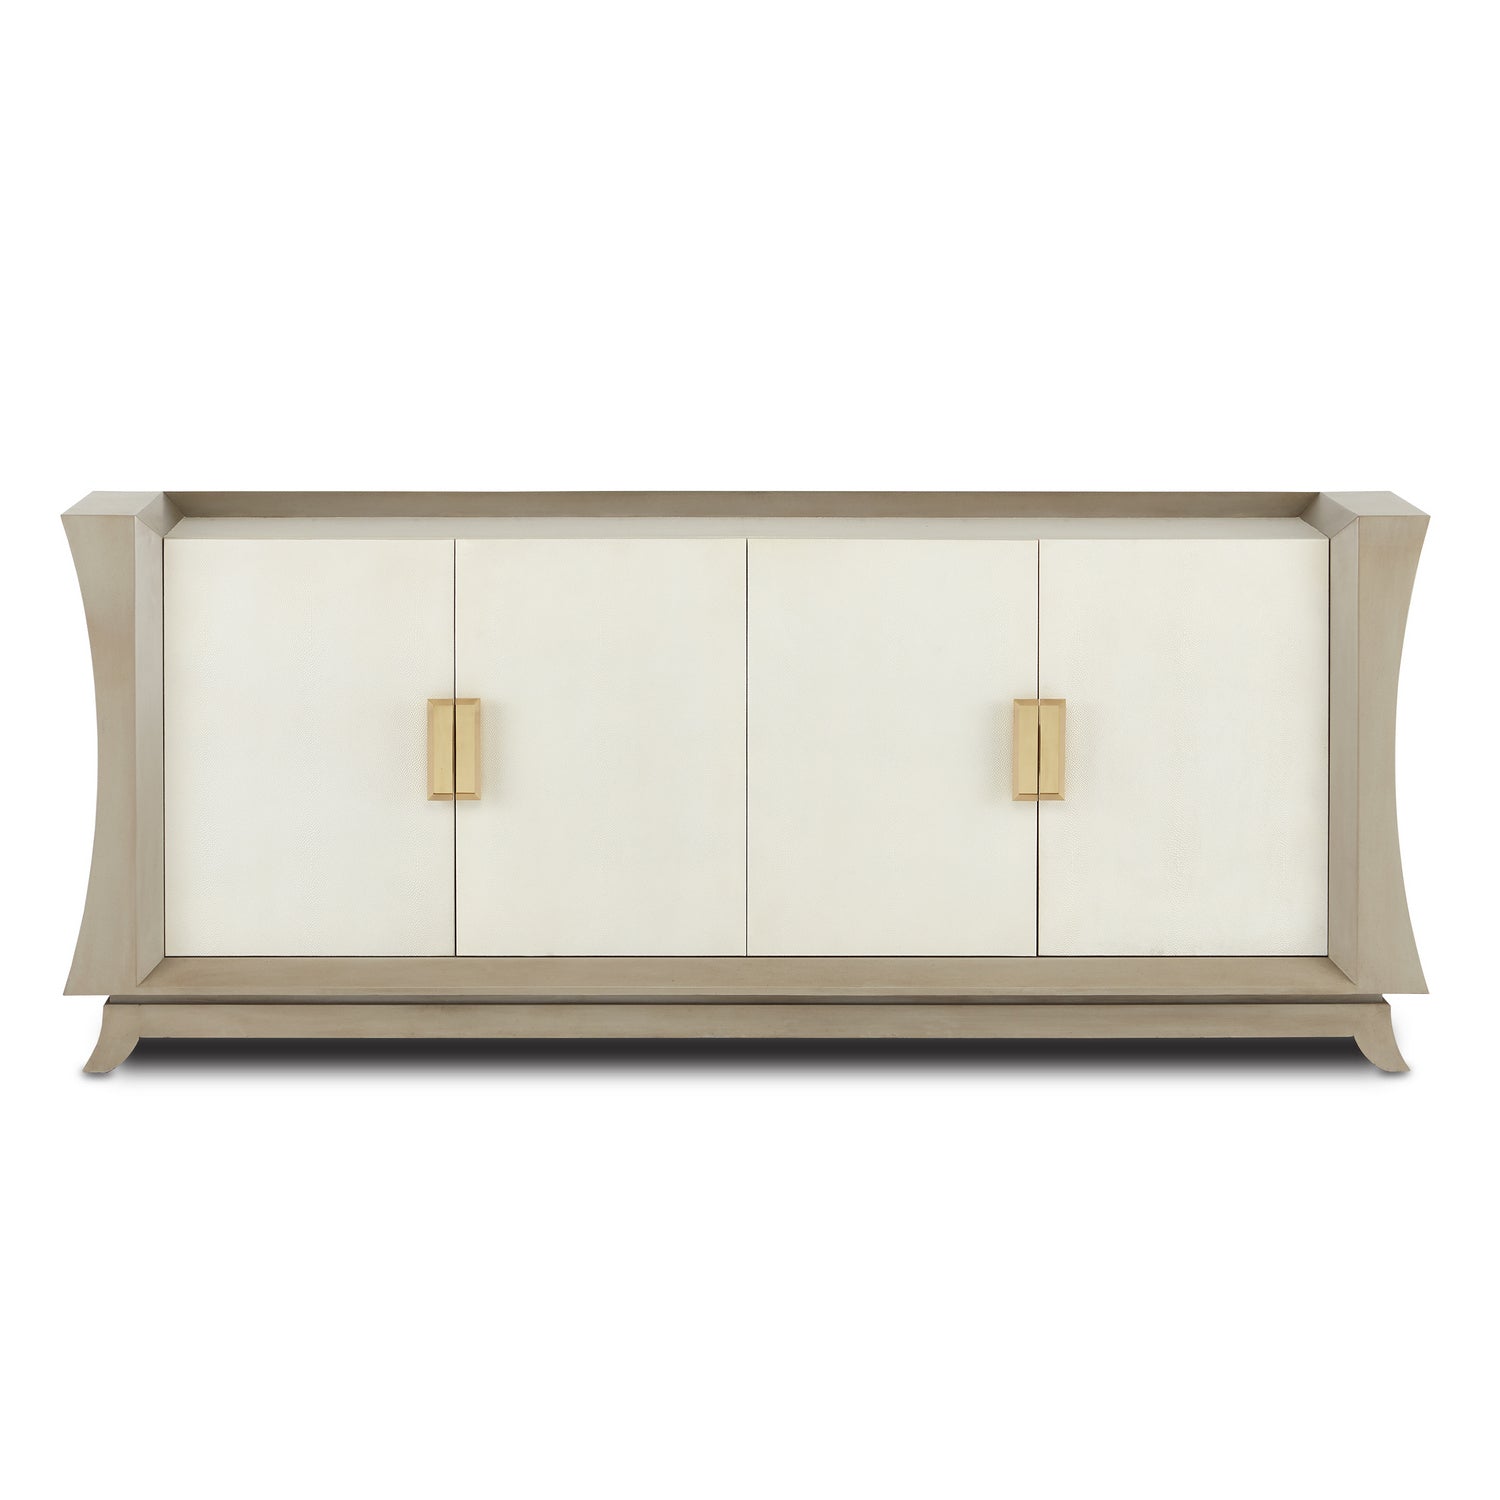 Credenza from the Barry Goralnick collection in Oyster Gray/Cream/Brushed Polished Brass finish